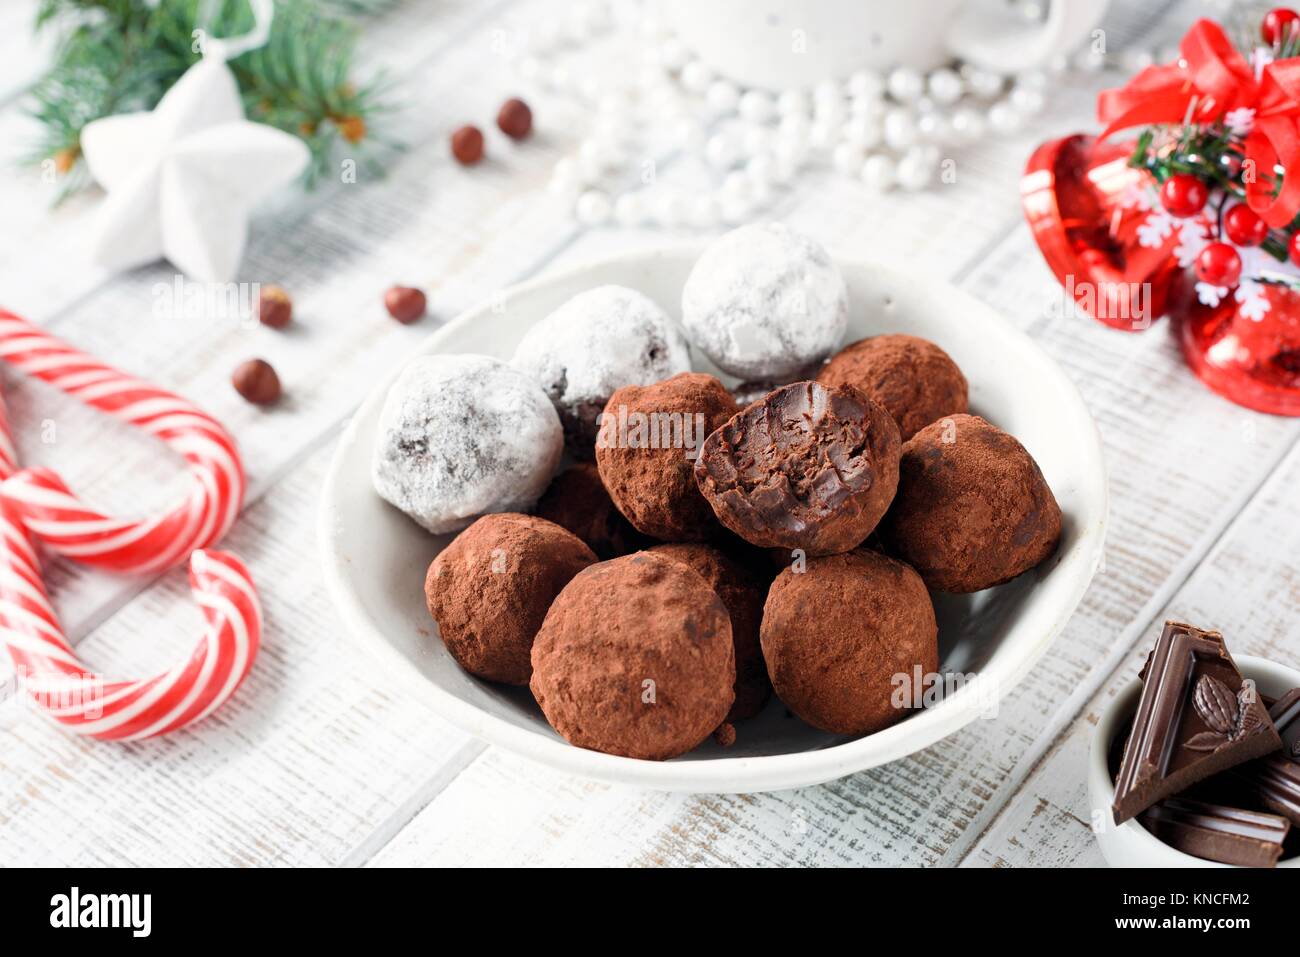 Homemade chocolate candy truffles with candy canes on white table. Christmas sweets. Closeup view Stock Photo